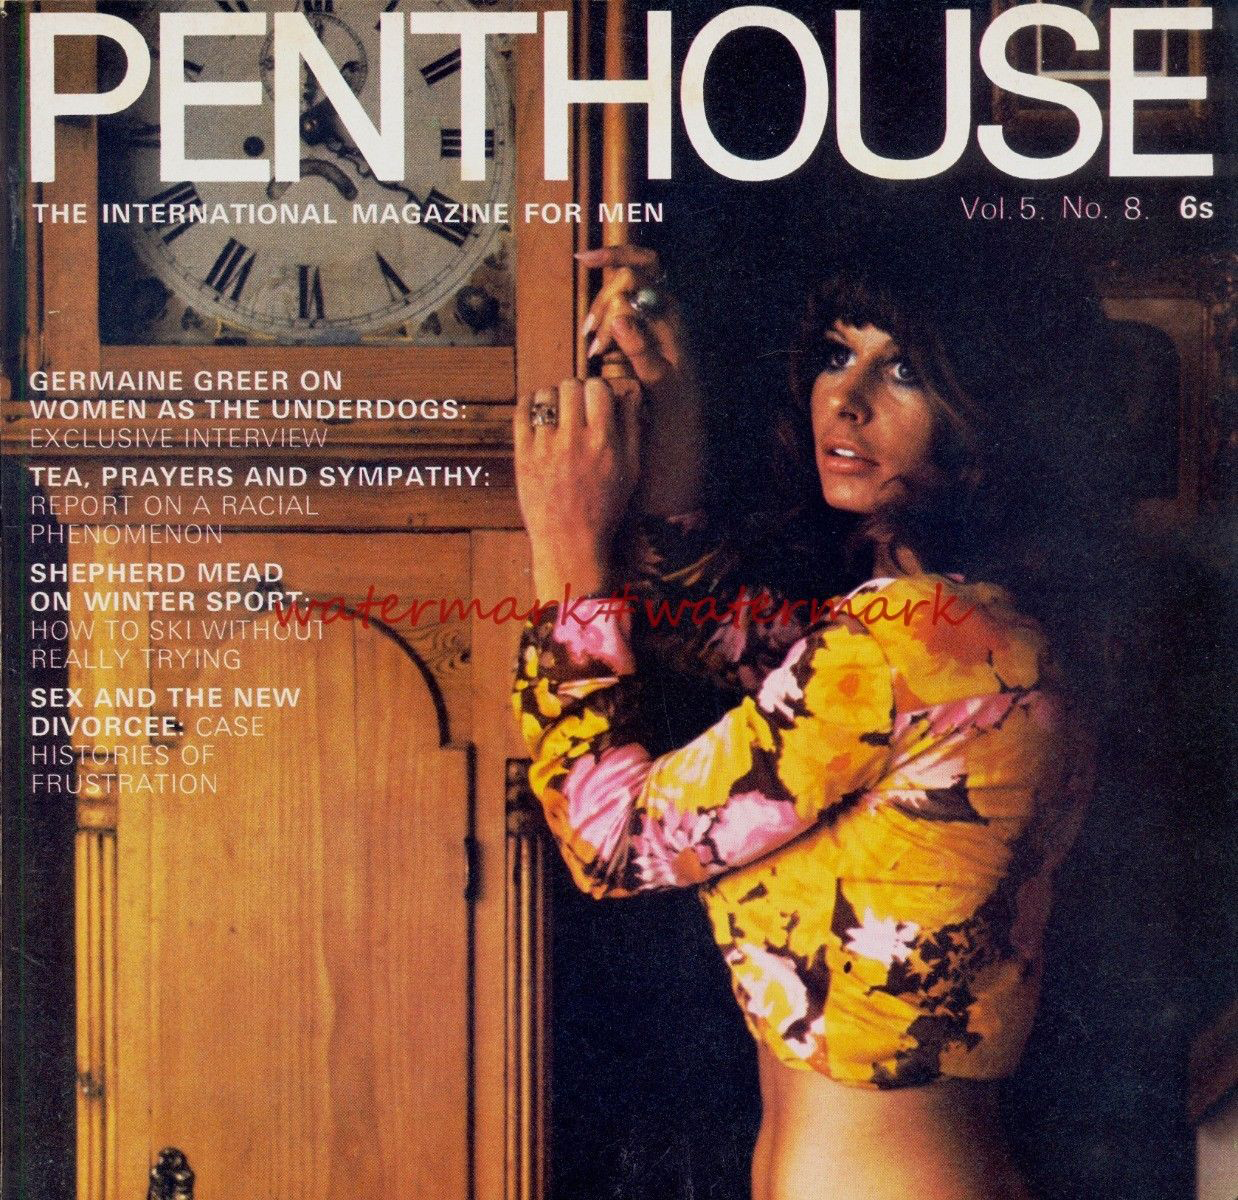 Penthouse UK Vol. 5 # 8 magazine back issue Penthouse UK magizine back copy Penthouse UK Vol. 5 # 8 Magazine Back Issue Published by Penthouse Publishing, Bob Guccione. Germaine Greer On Women As The Underdogs: Exclusive Interview.